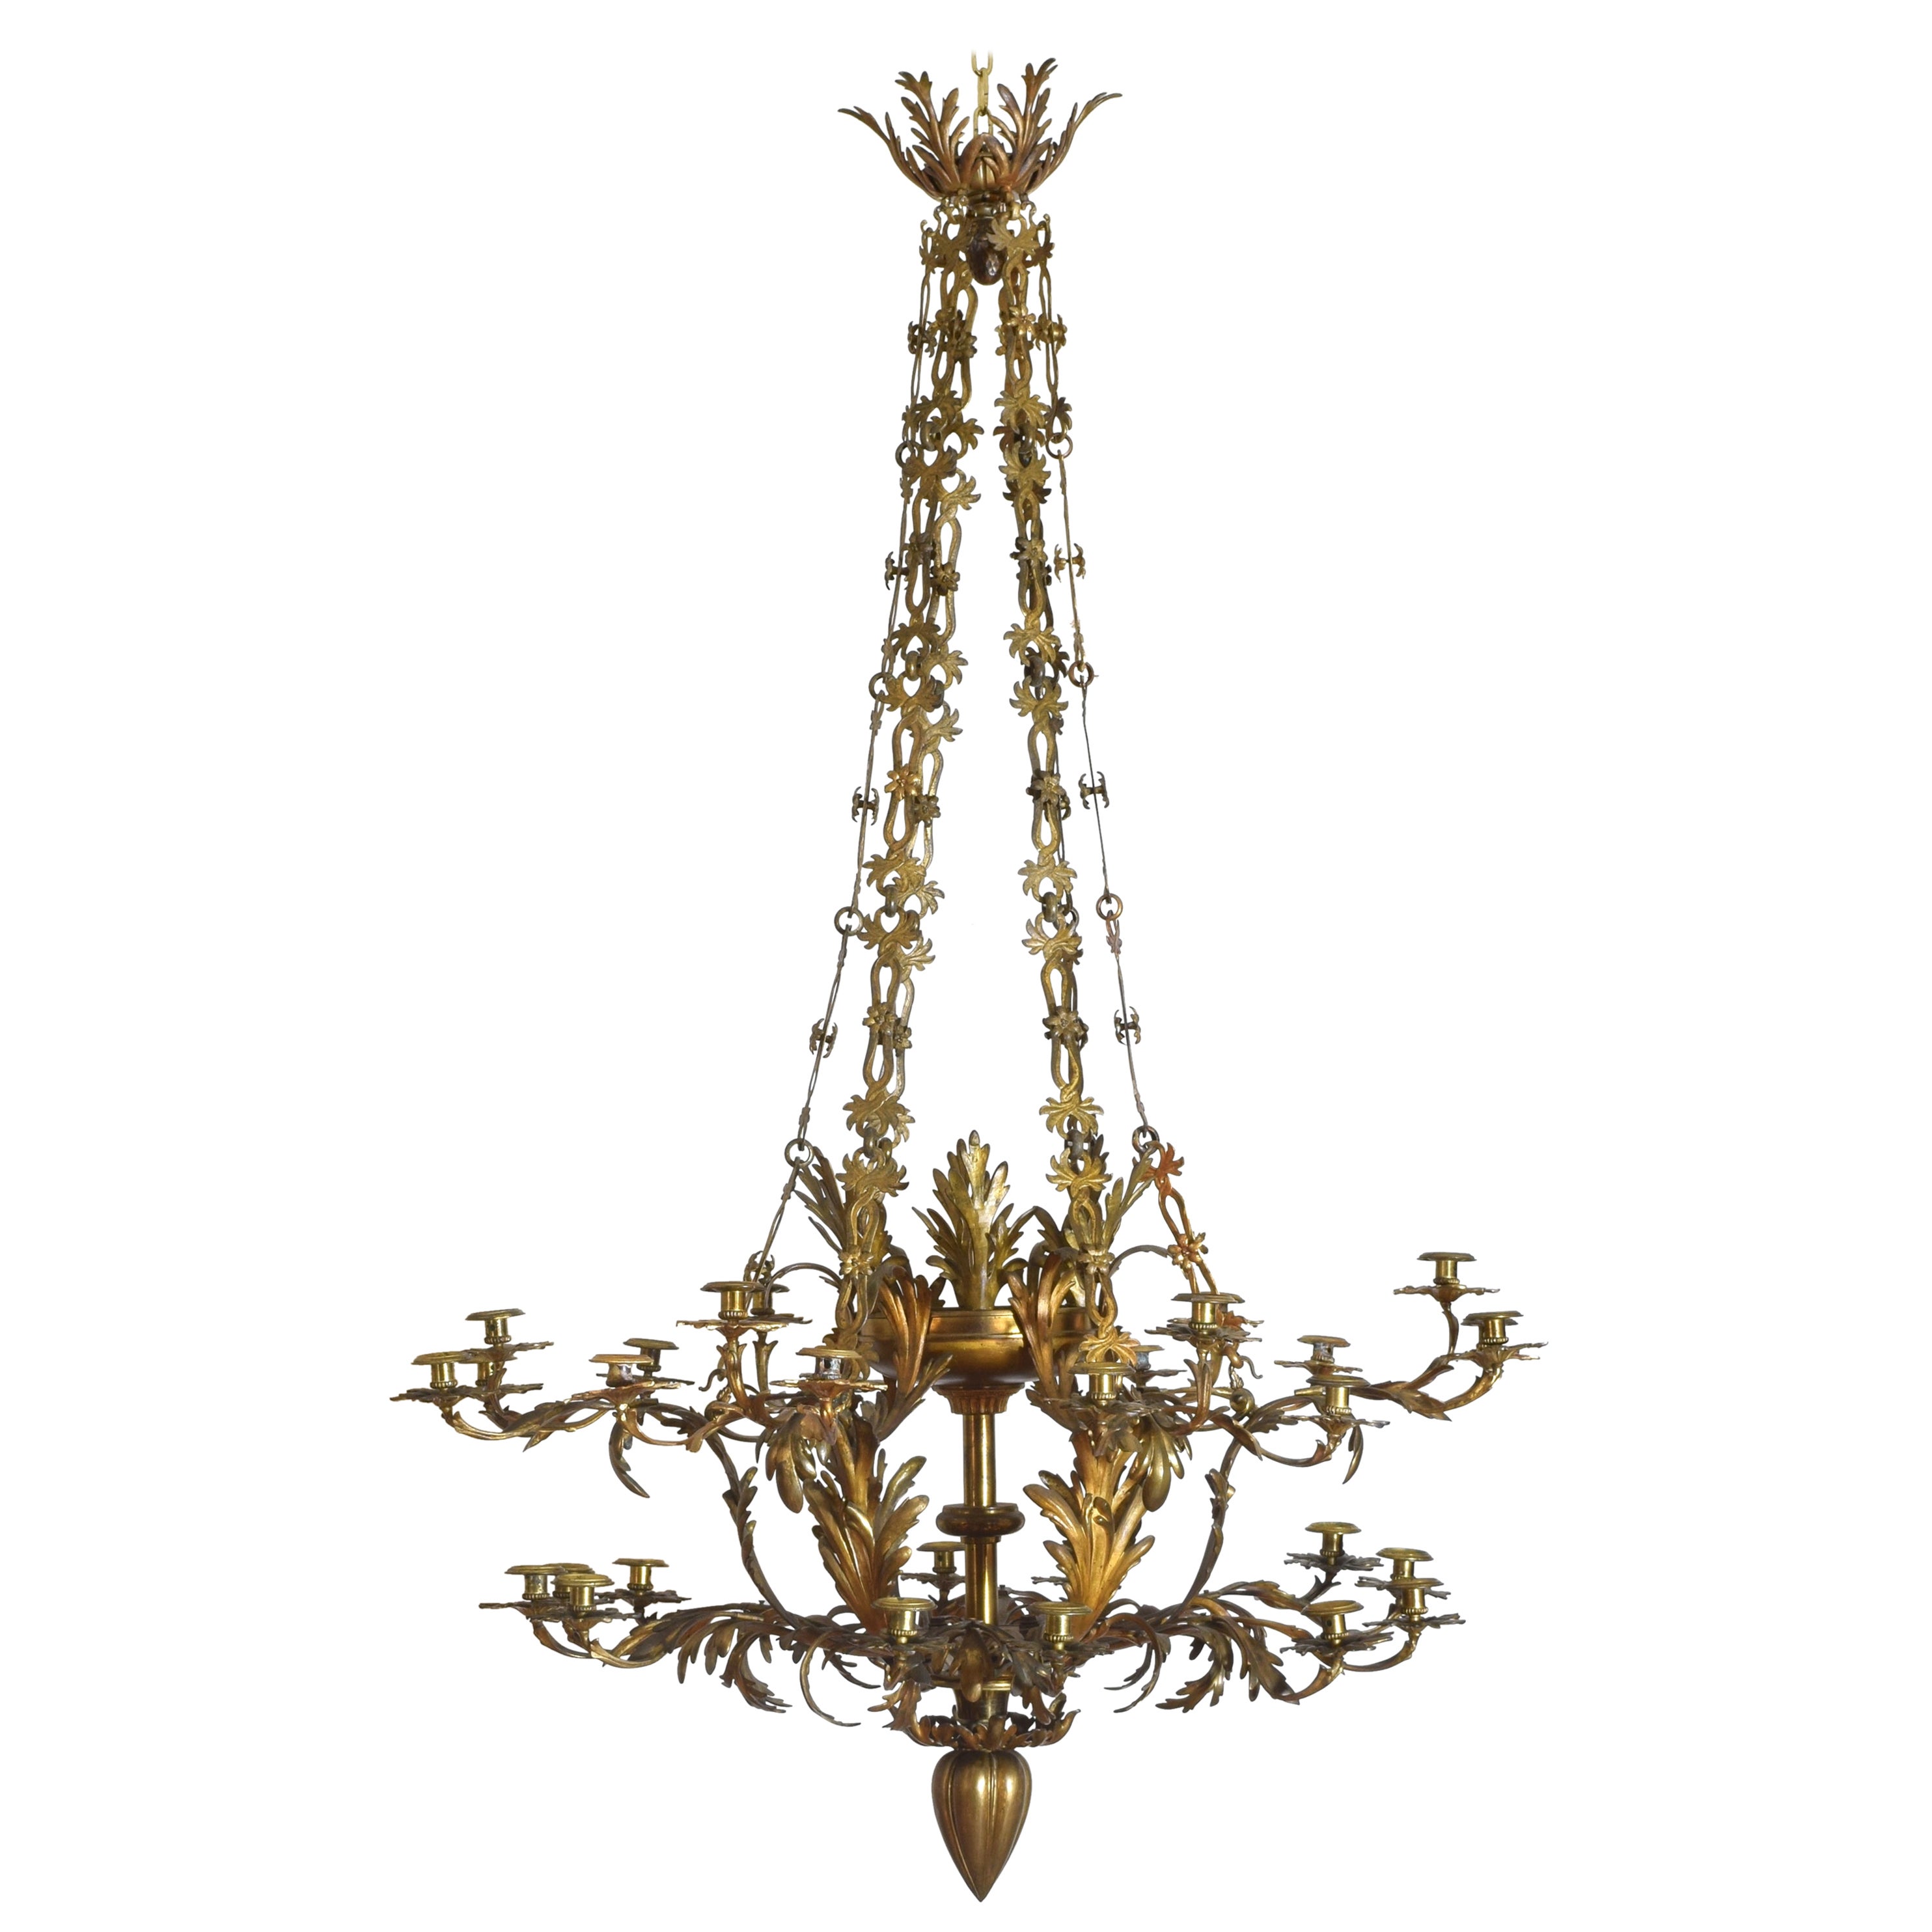 Italian, Apulia, Late Neoclassical Cast and Gilt Brass 30-Light Chandelier